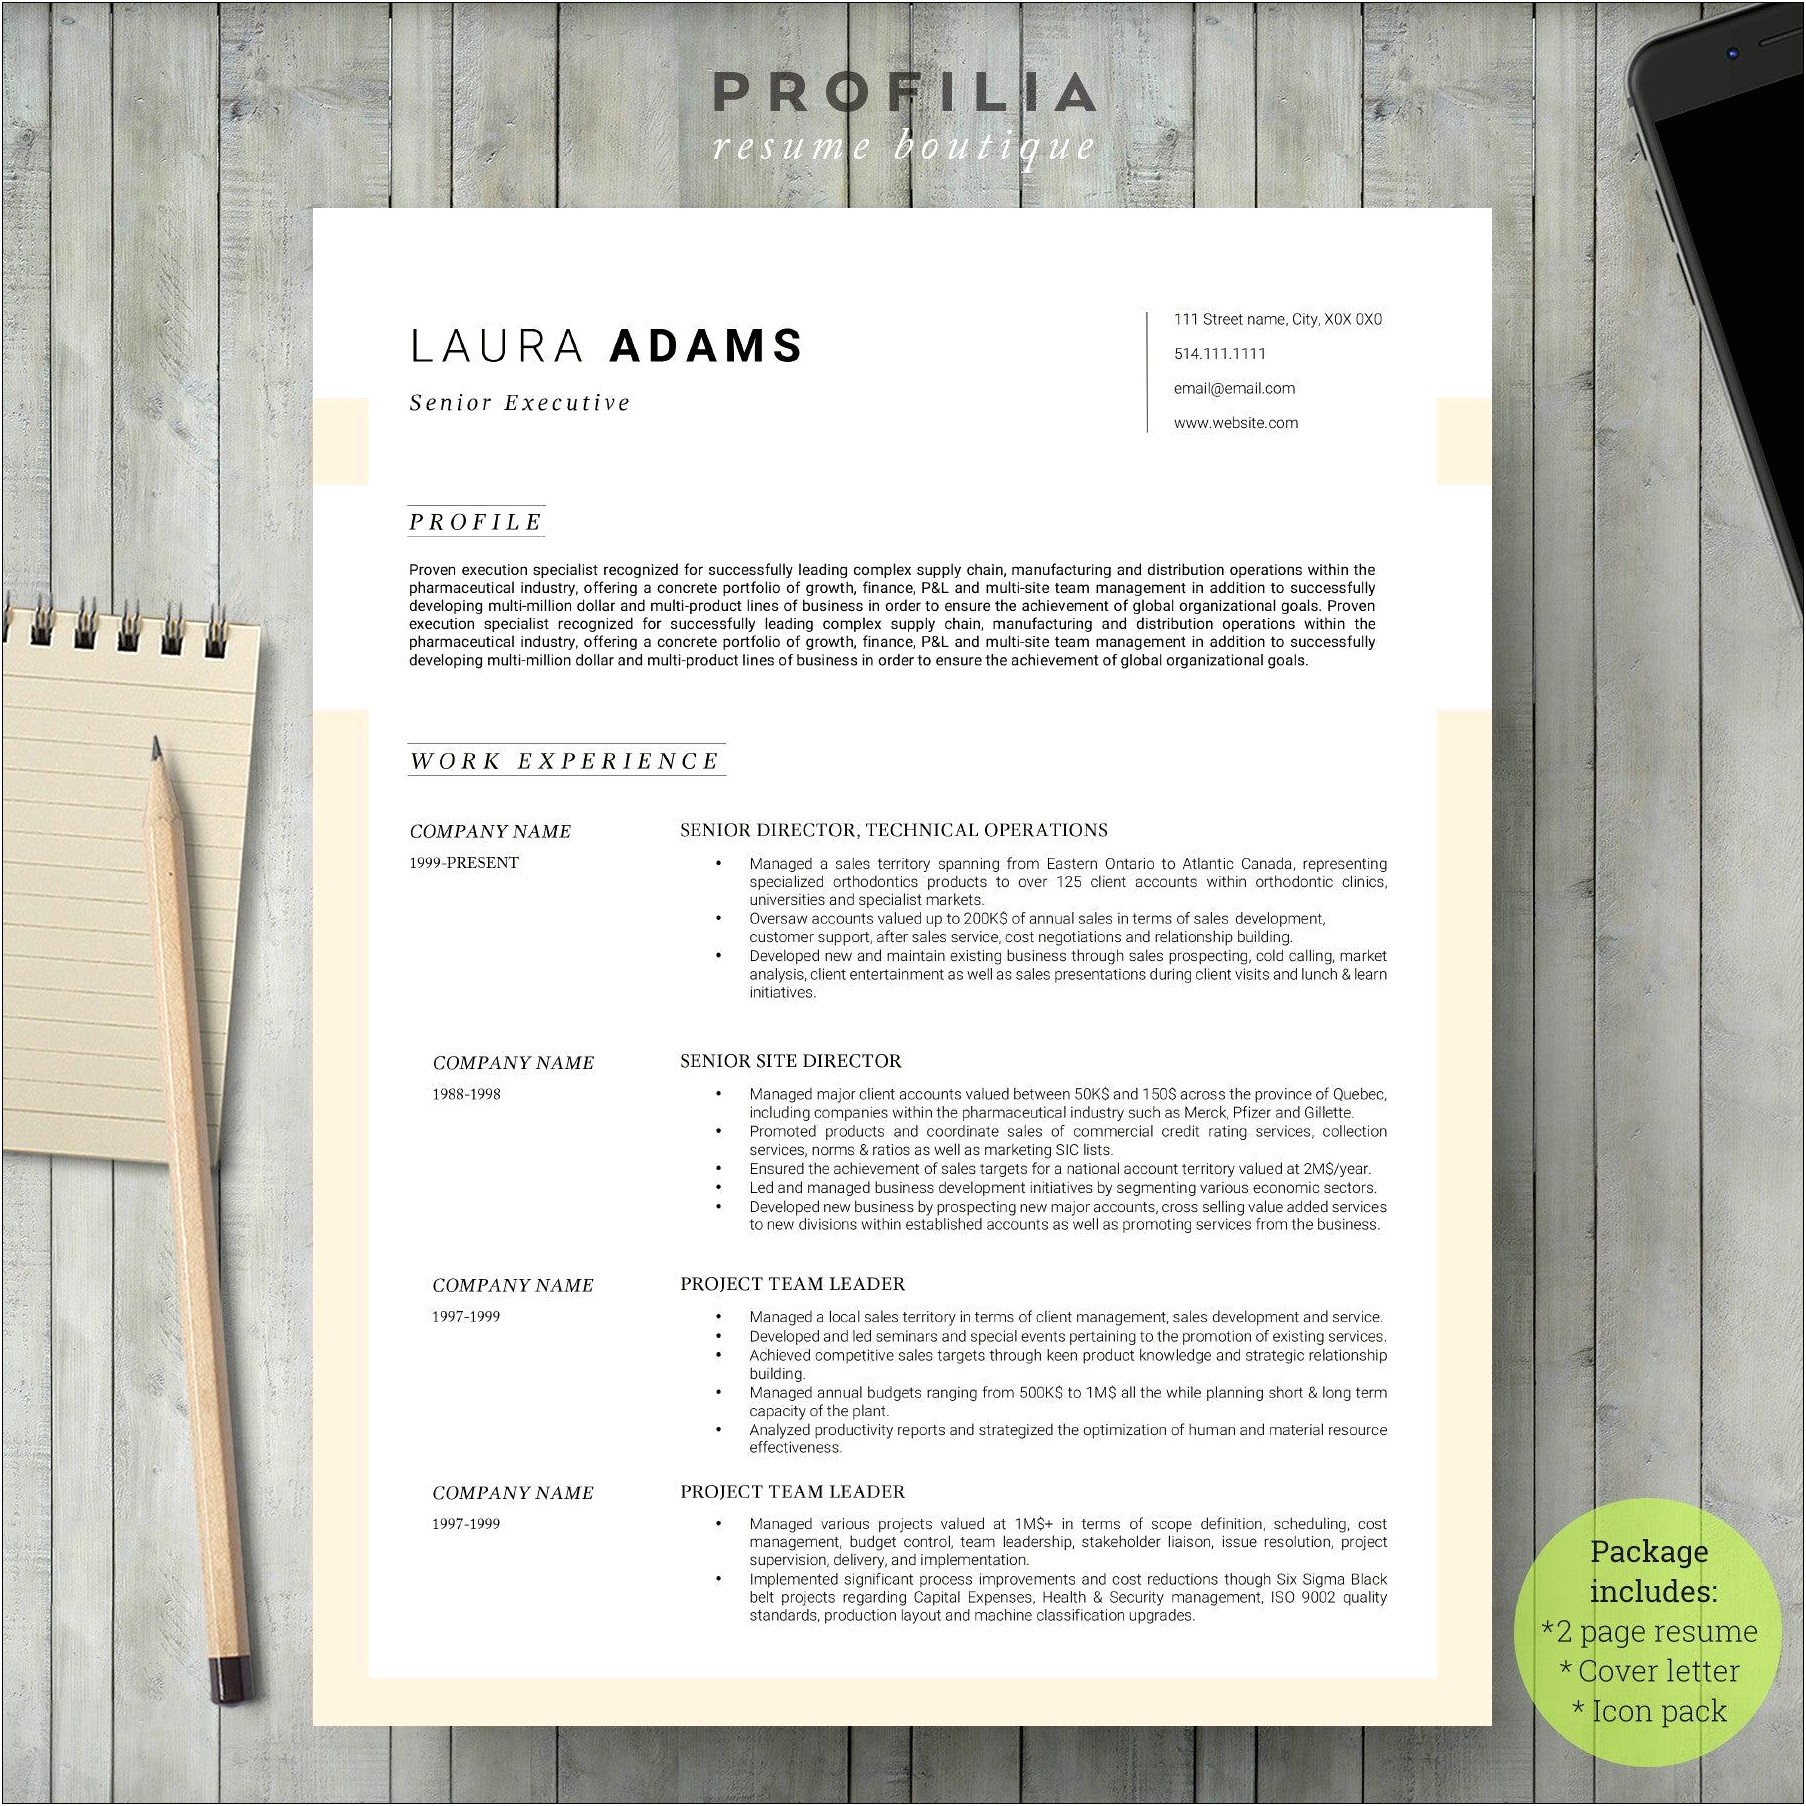 Word Document Resume Cover Letter Template